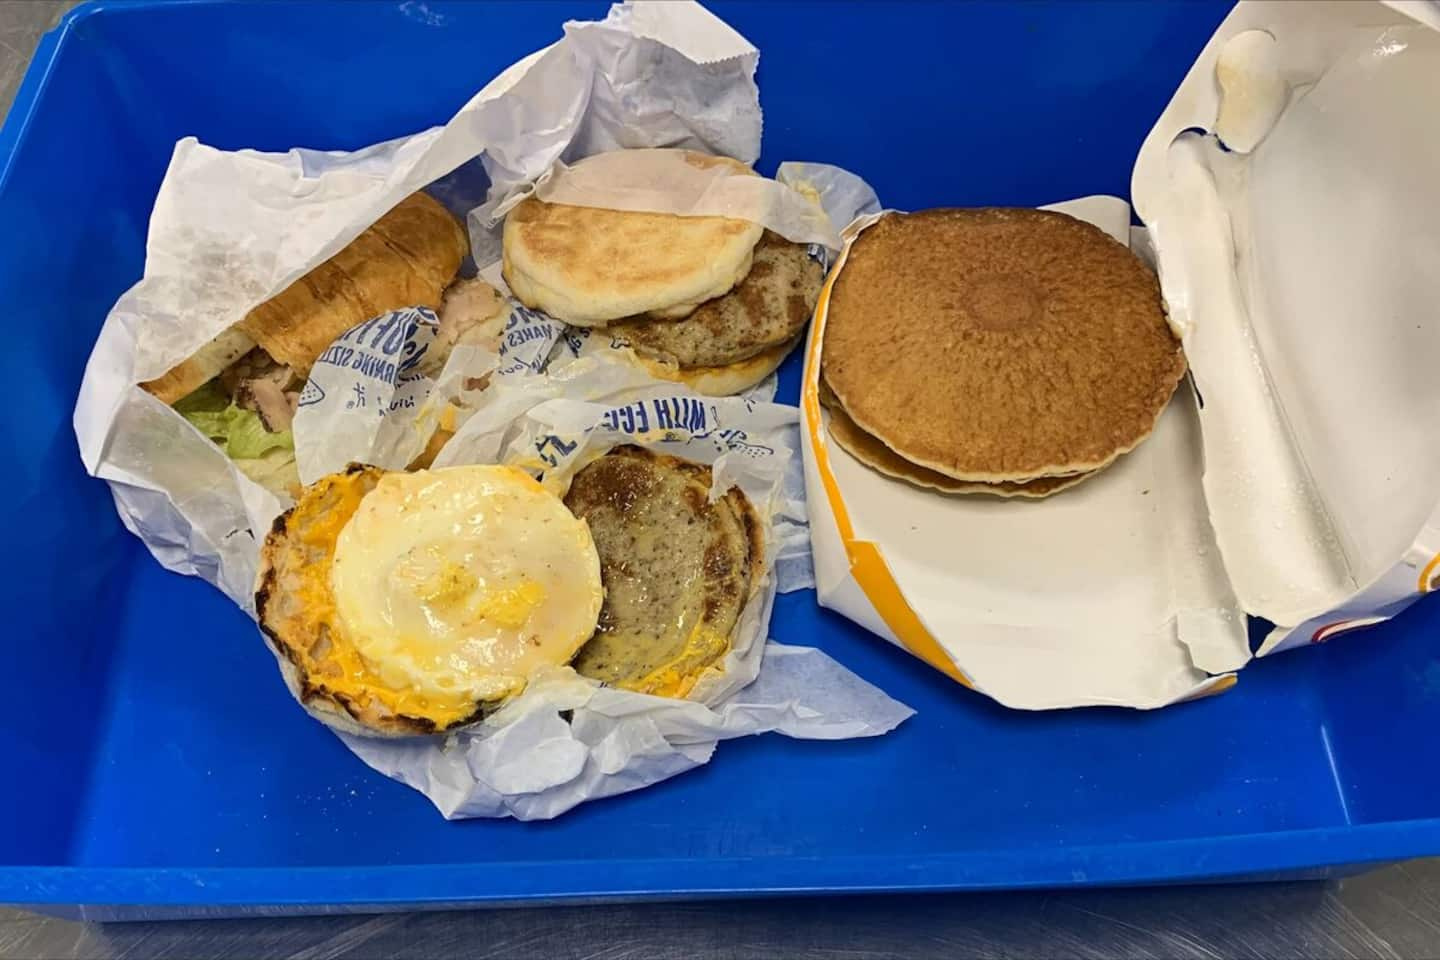 $2,000 fine for carrying McMuffins